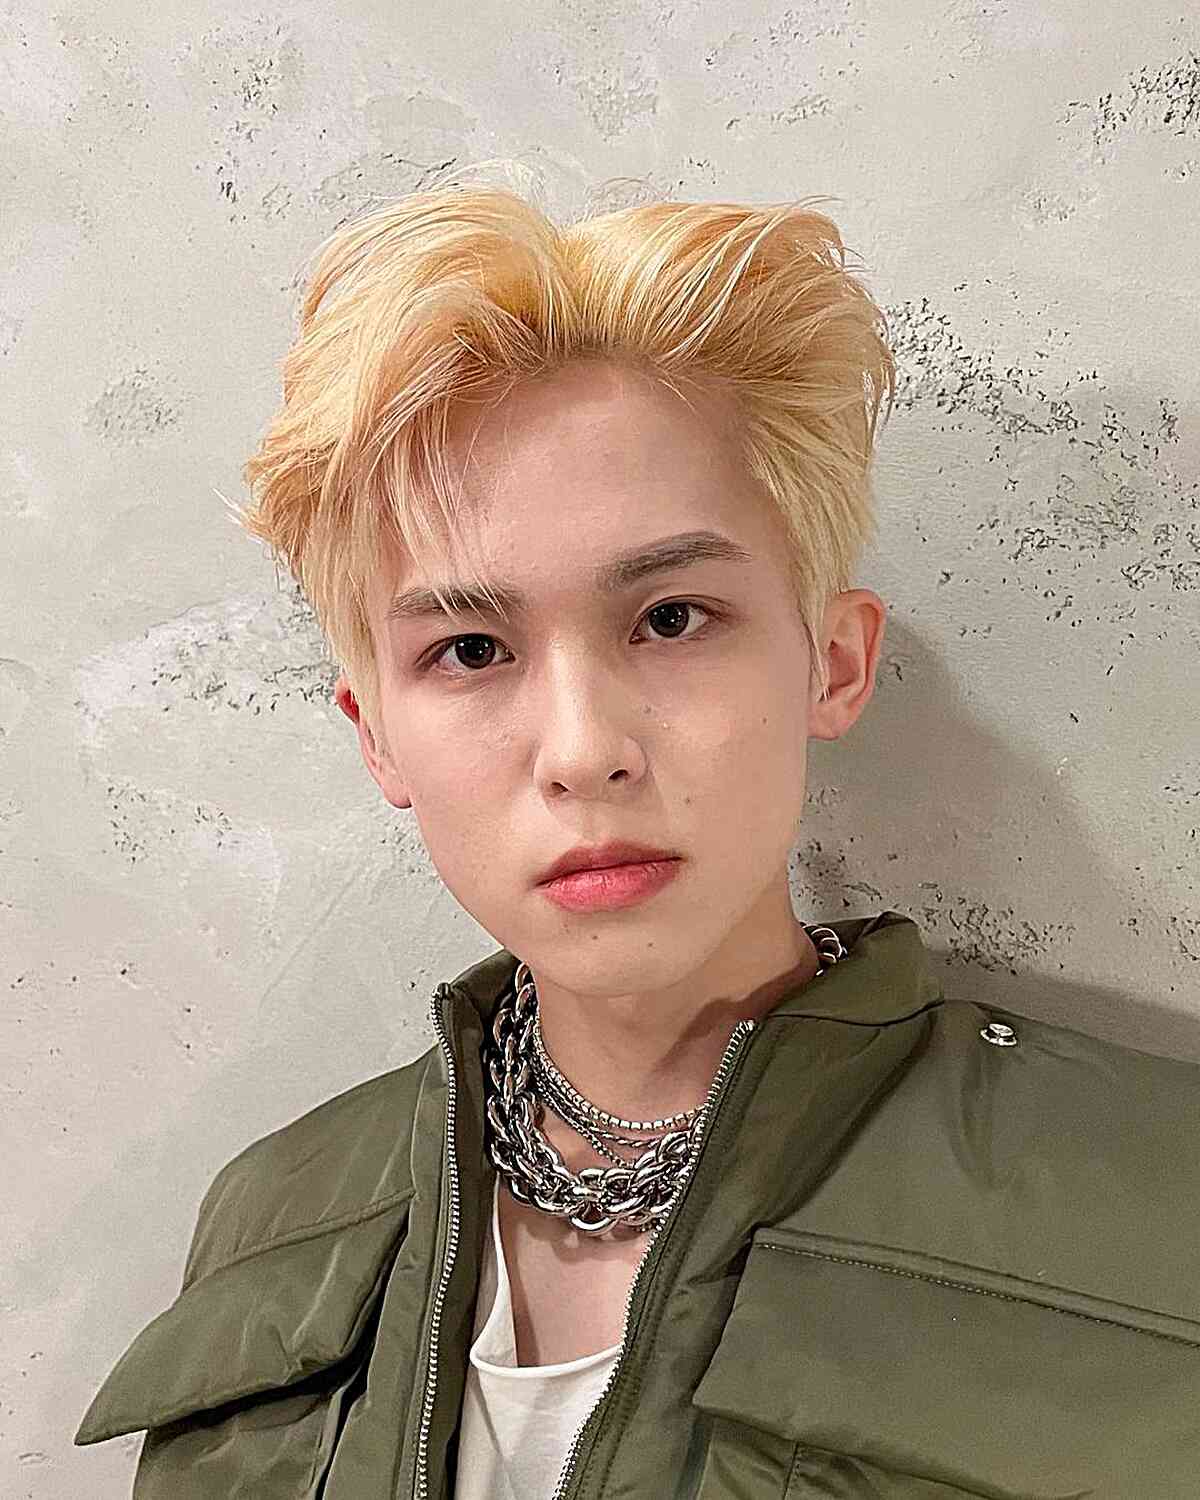 Kpop Flowy Hairstyle with Blown Back Bangs for Young Guys with Blonde Hair